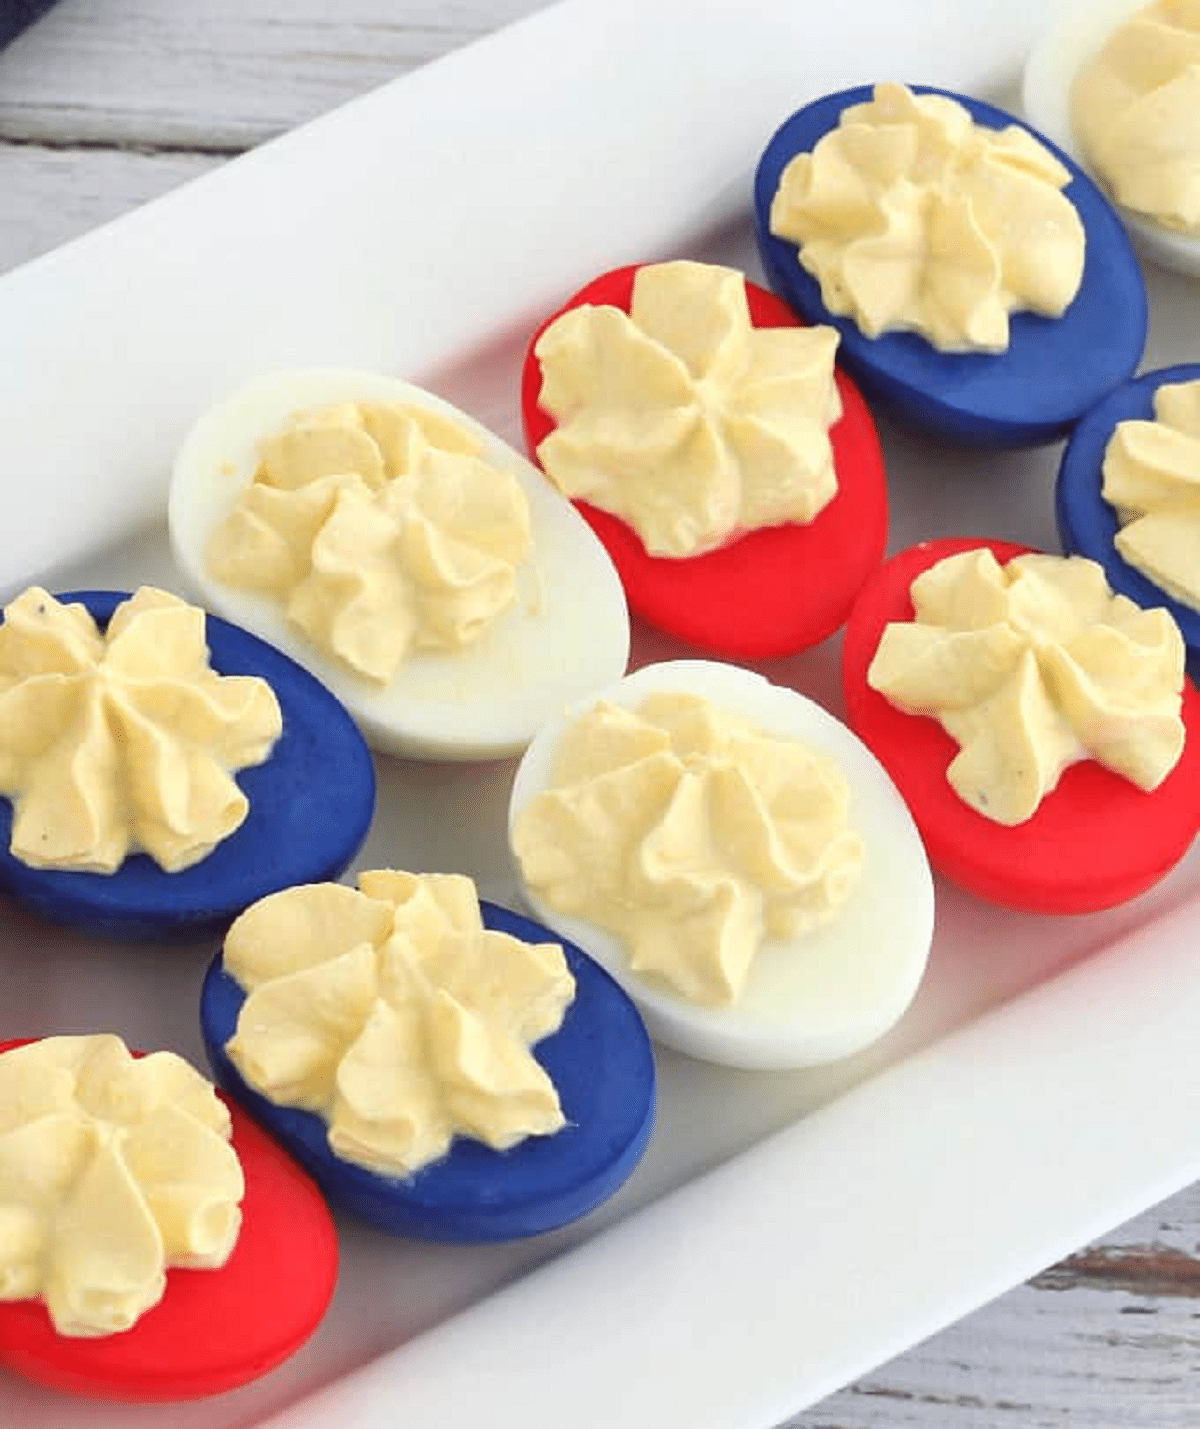 Deviled eggs dyed red and blue on platter